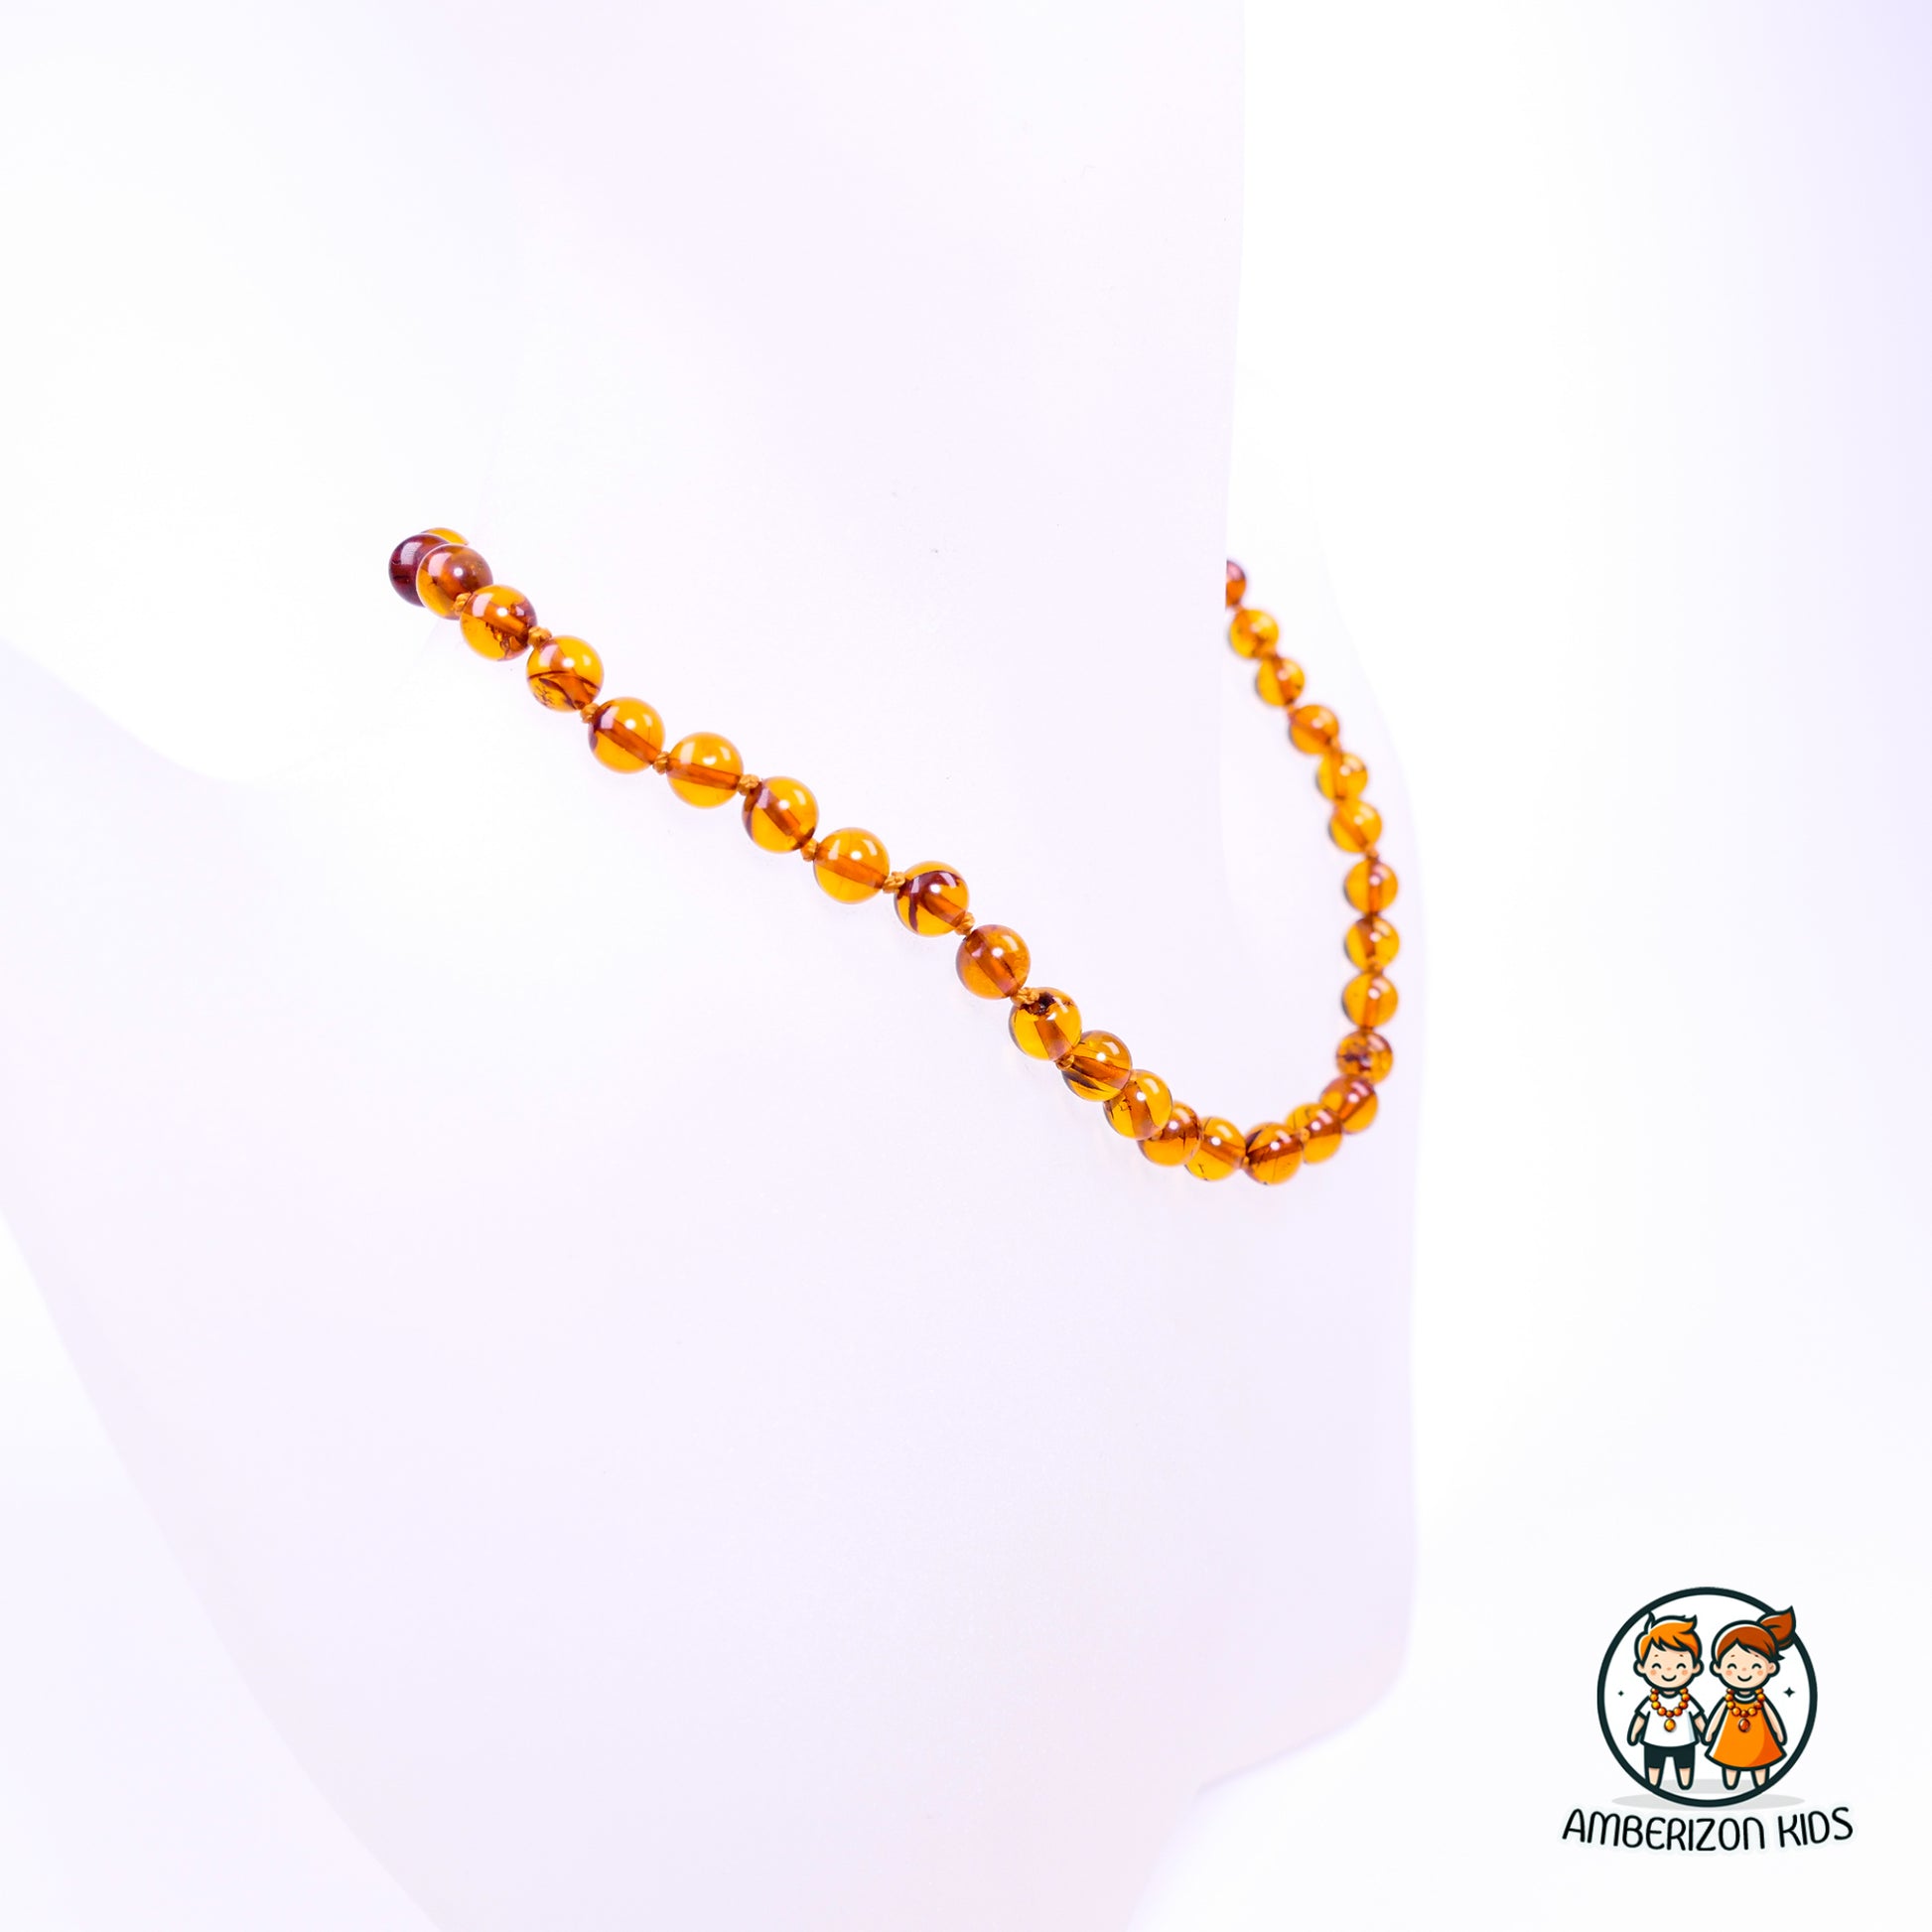 Golden Glow: Kids' Round Baltic Amber Necklace - Authentic Ø6mm Beads, 6.5g